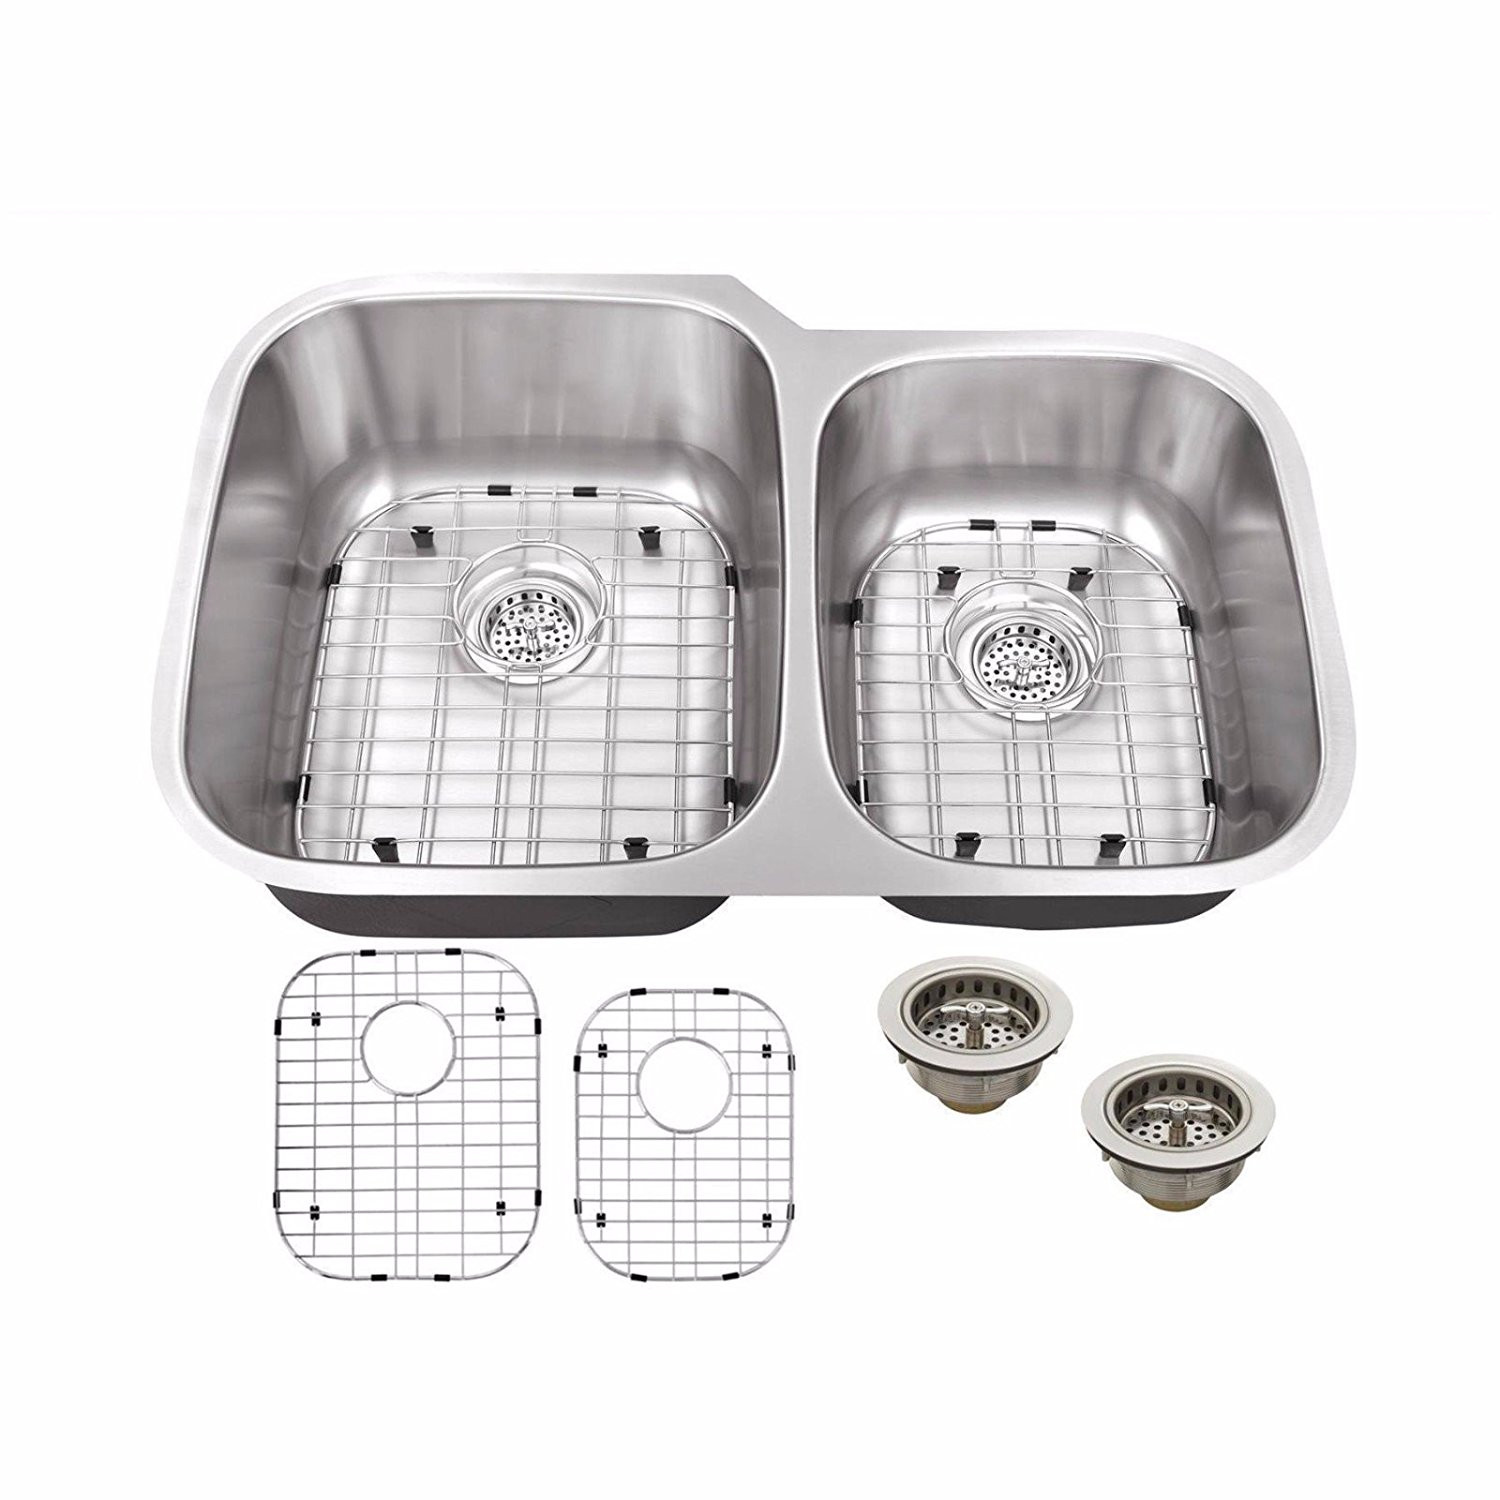 Cahaba CA122232 18 Gauge Double Bowl Kitchen Sink With Grid Sets and Drain